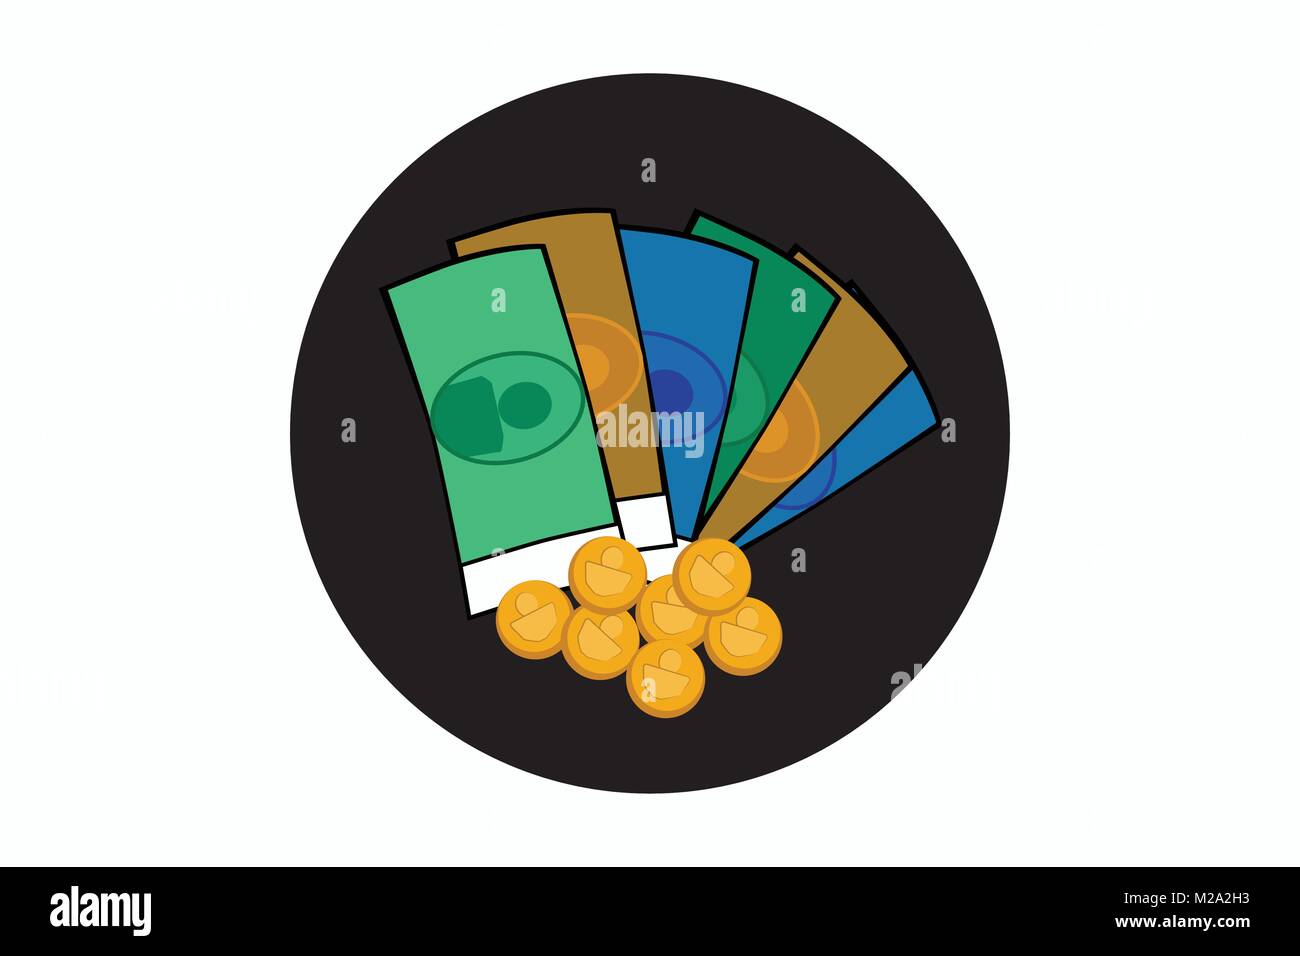 Cash icon, money icon, bill and coin icon, pay icon, symbol for pay, illustration of play money, schematic money, vector of bank notes and coins Stock Vector